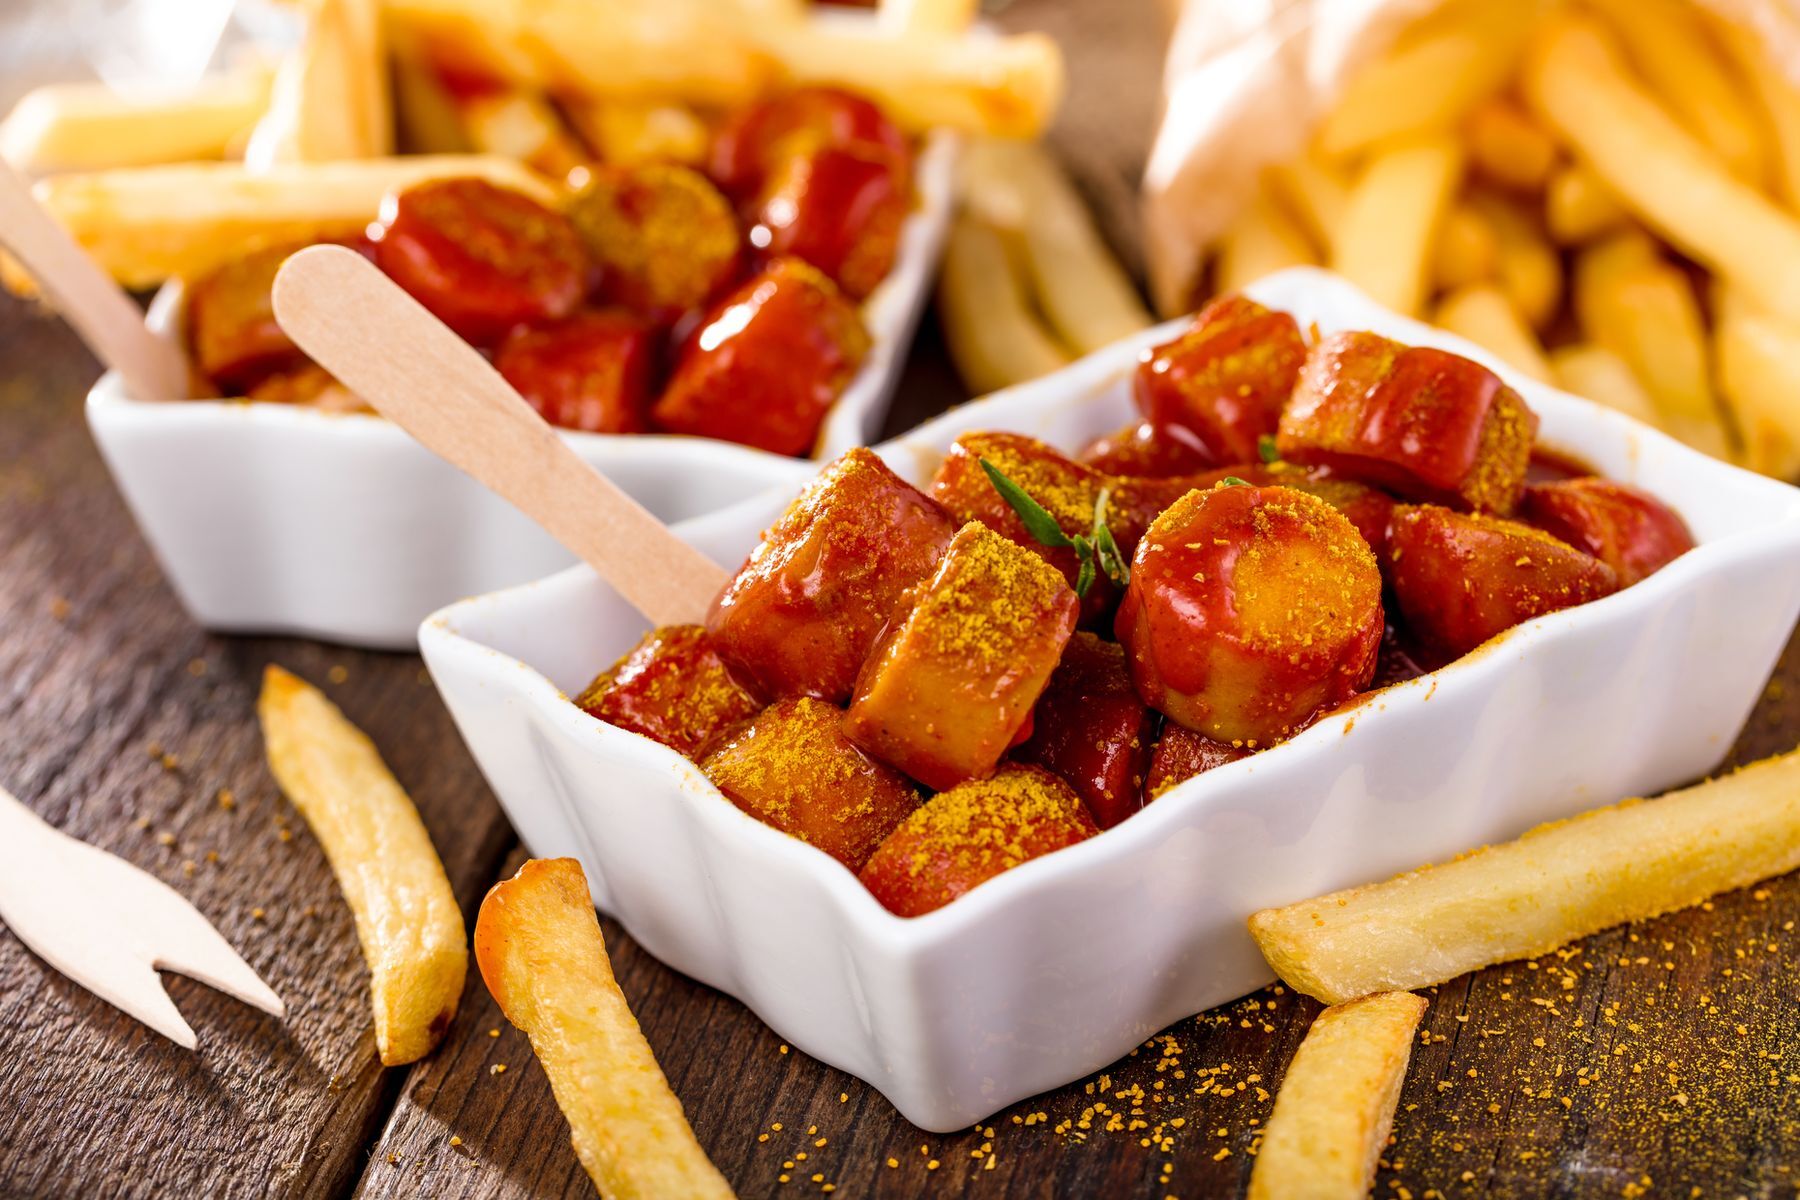 <p><a href="https://www.visitberlin.de/en/berlins-currywurst" rel="noreferrer noopener">No matter what sauce you choose</a> to add, Berlin currywurst remains a must in Germany.</p>